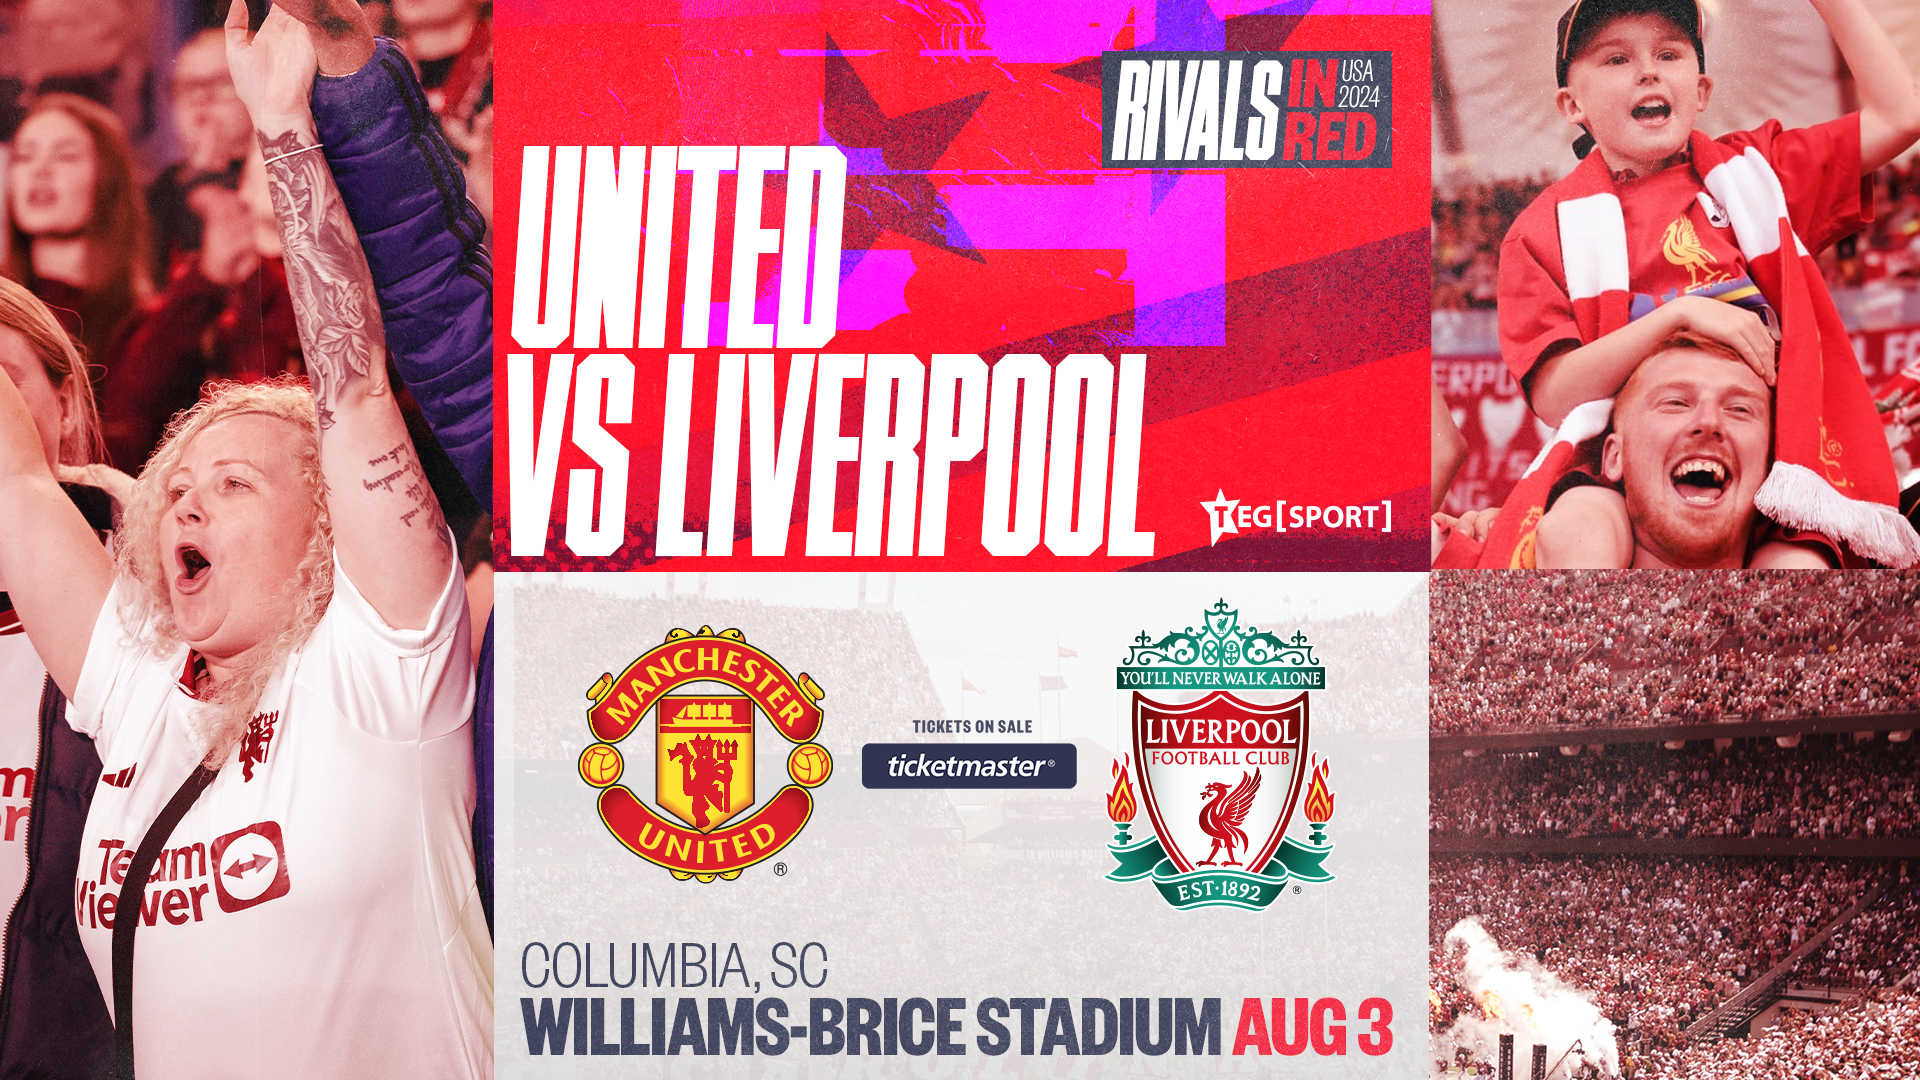 Liverpool F.C. and Manchester United to face off at Williams-Brice Stadium